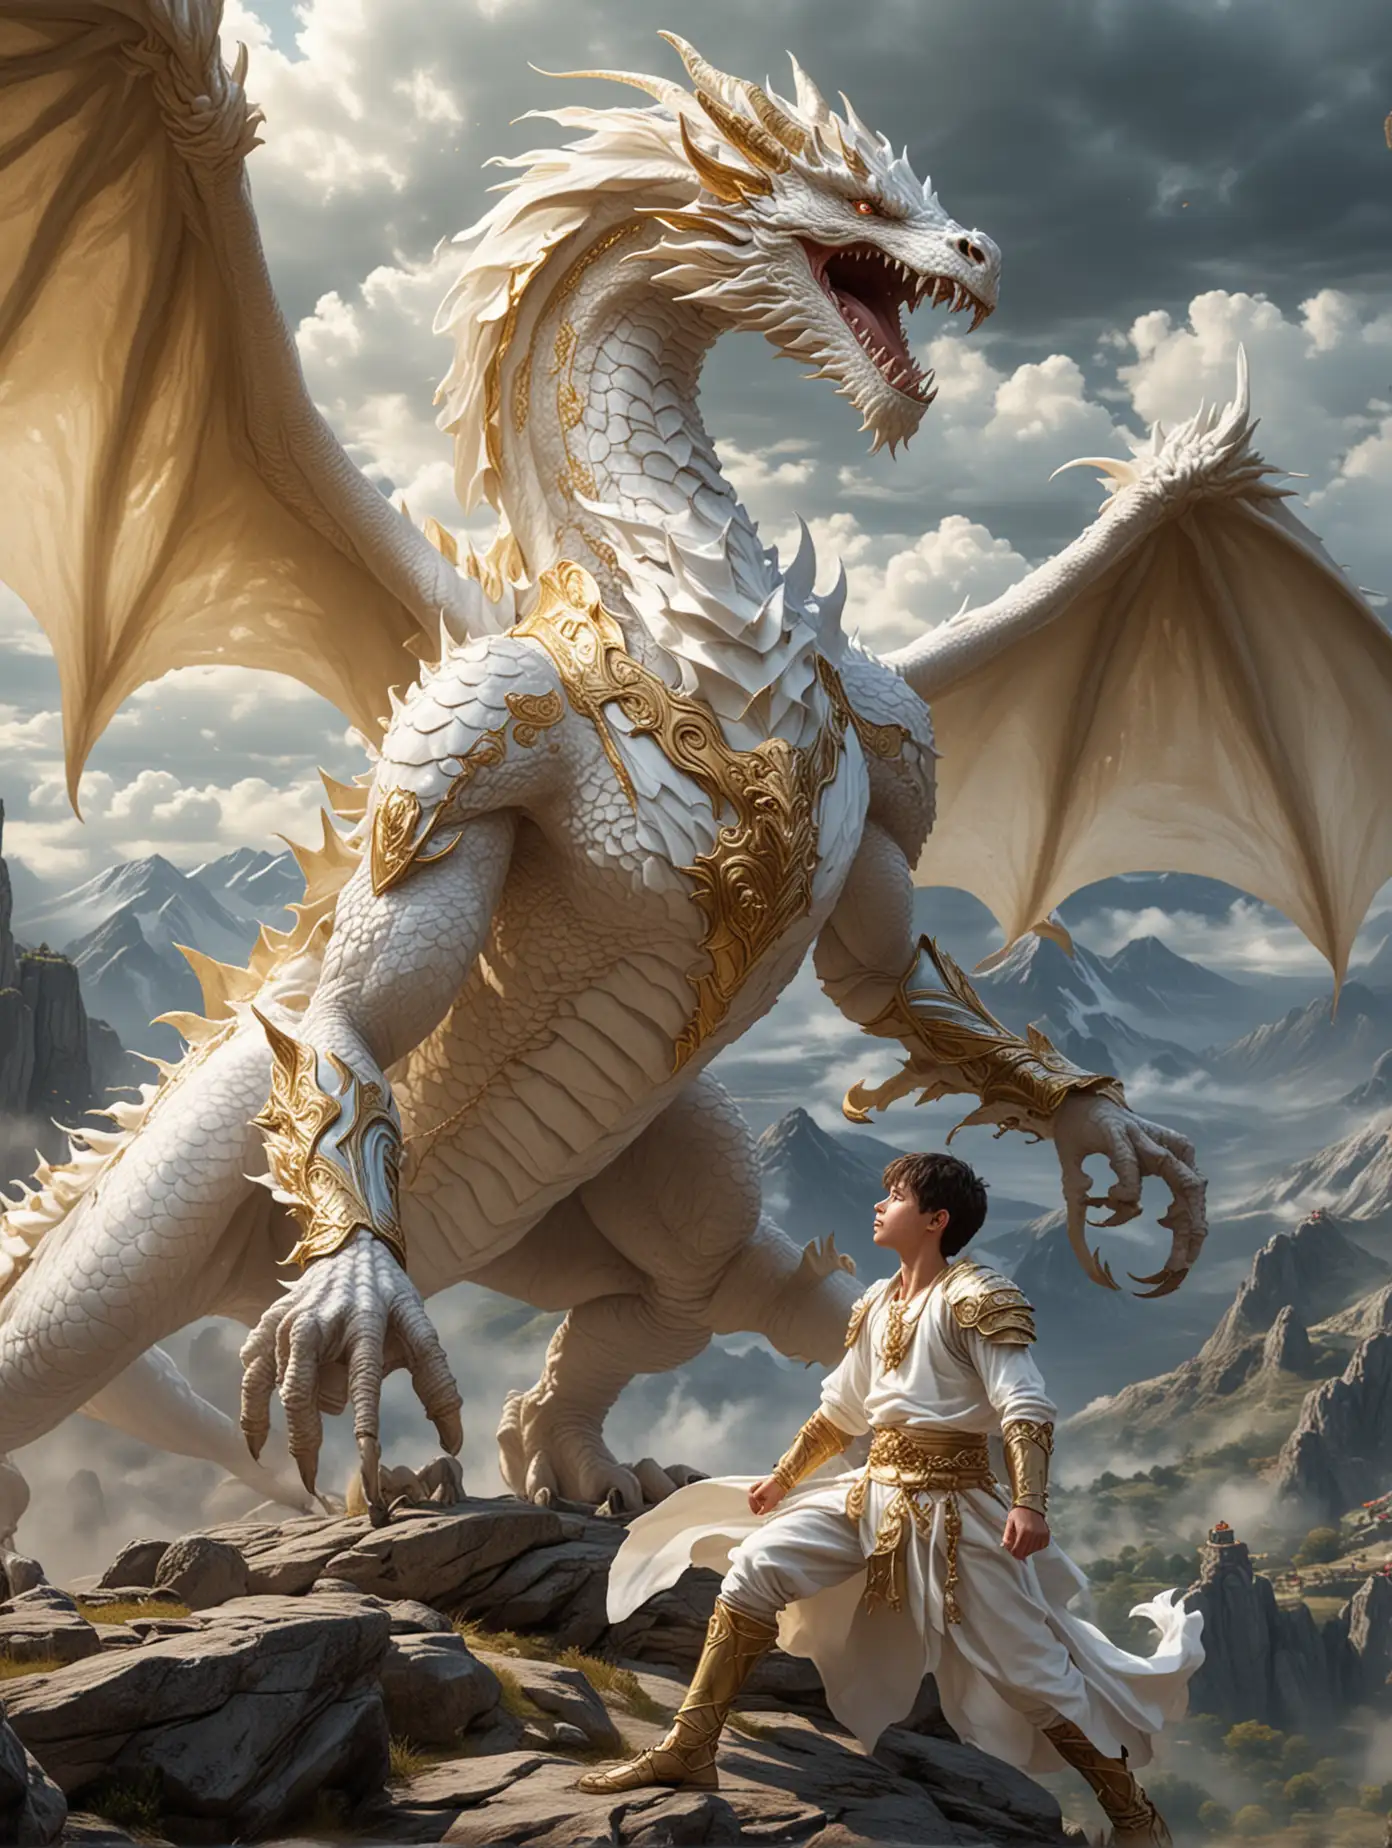 a handsome, bare-chested 15-year-old male knight wearing white cloth and gold jewelry fights with a giant white dragon on a mountain